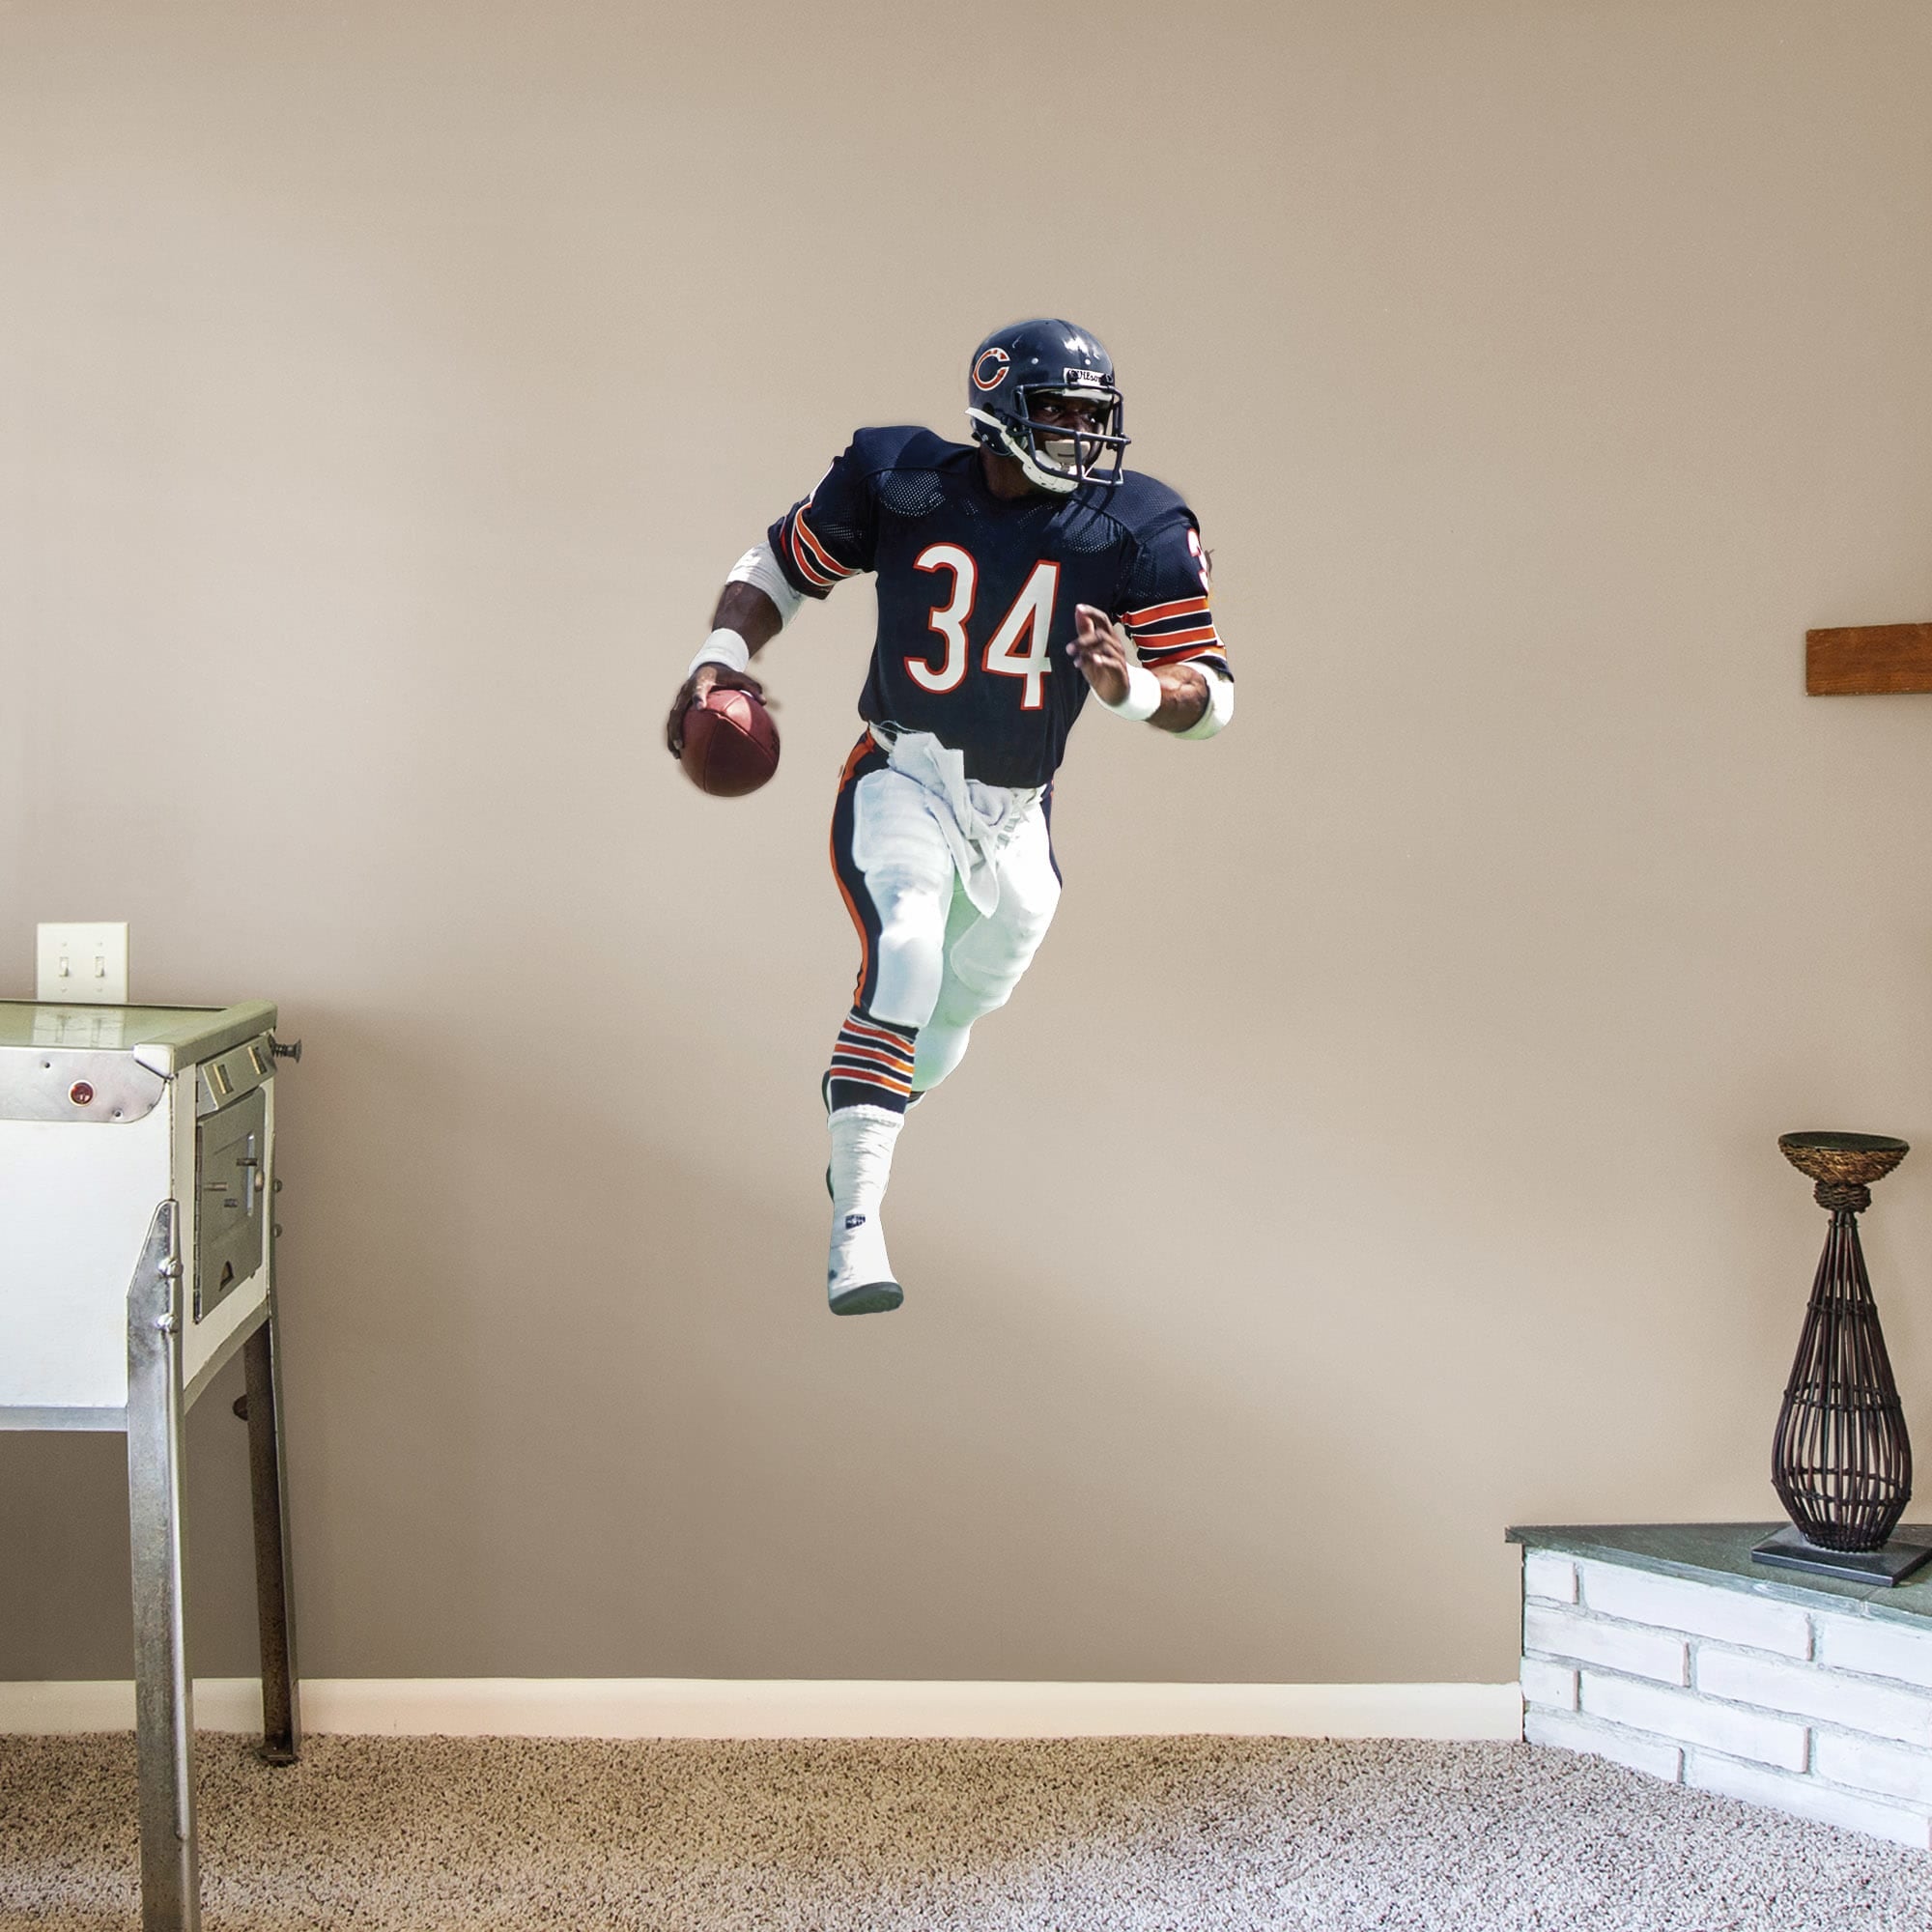 Walter Payton for Chicago Bears: Legend - Officially Licensed NFL Removable Wall Decal Giant Athlete + 2 Decals (29"W x 51"H) by